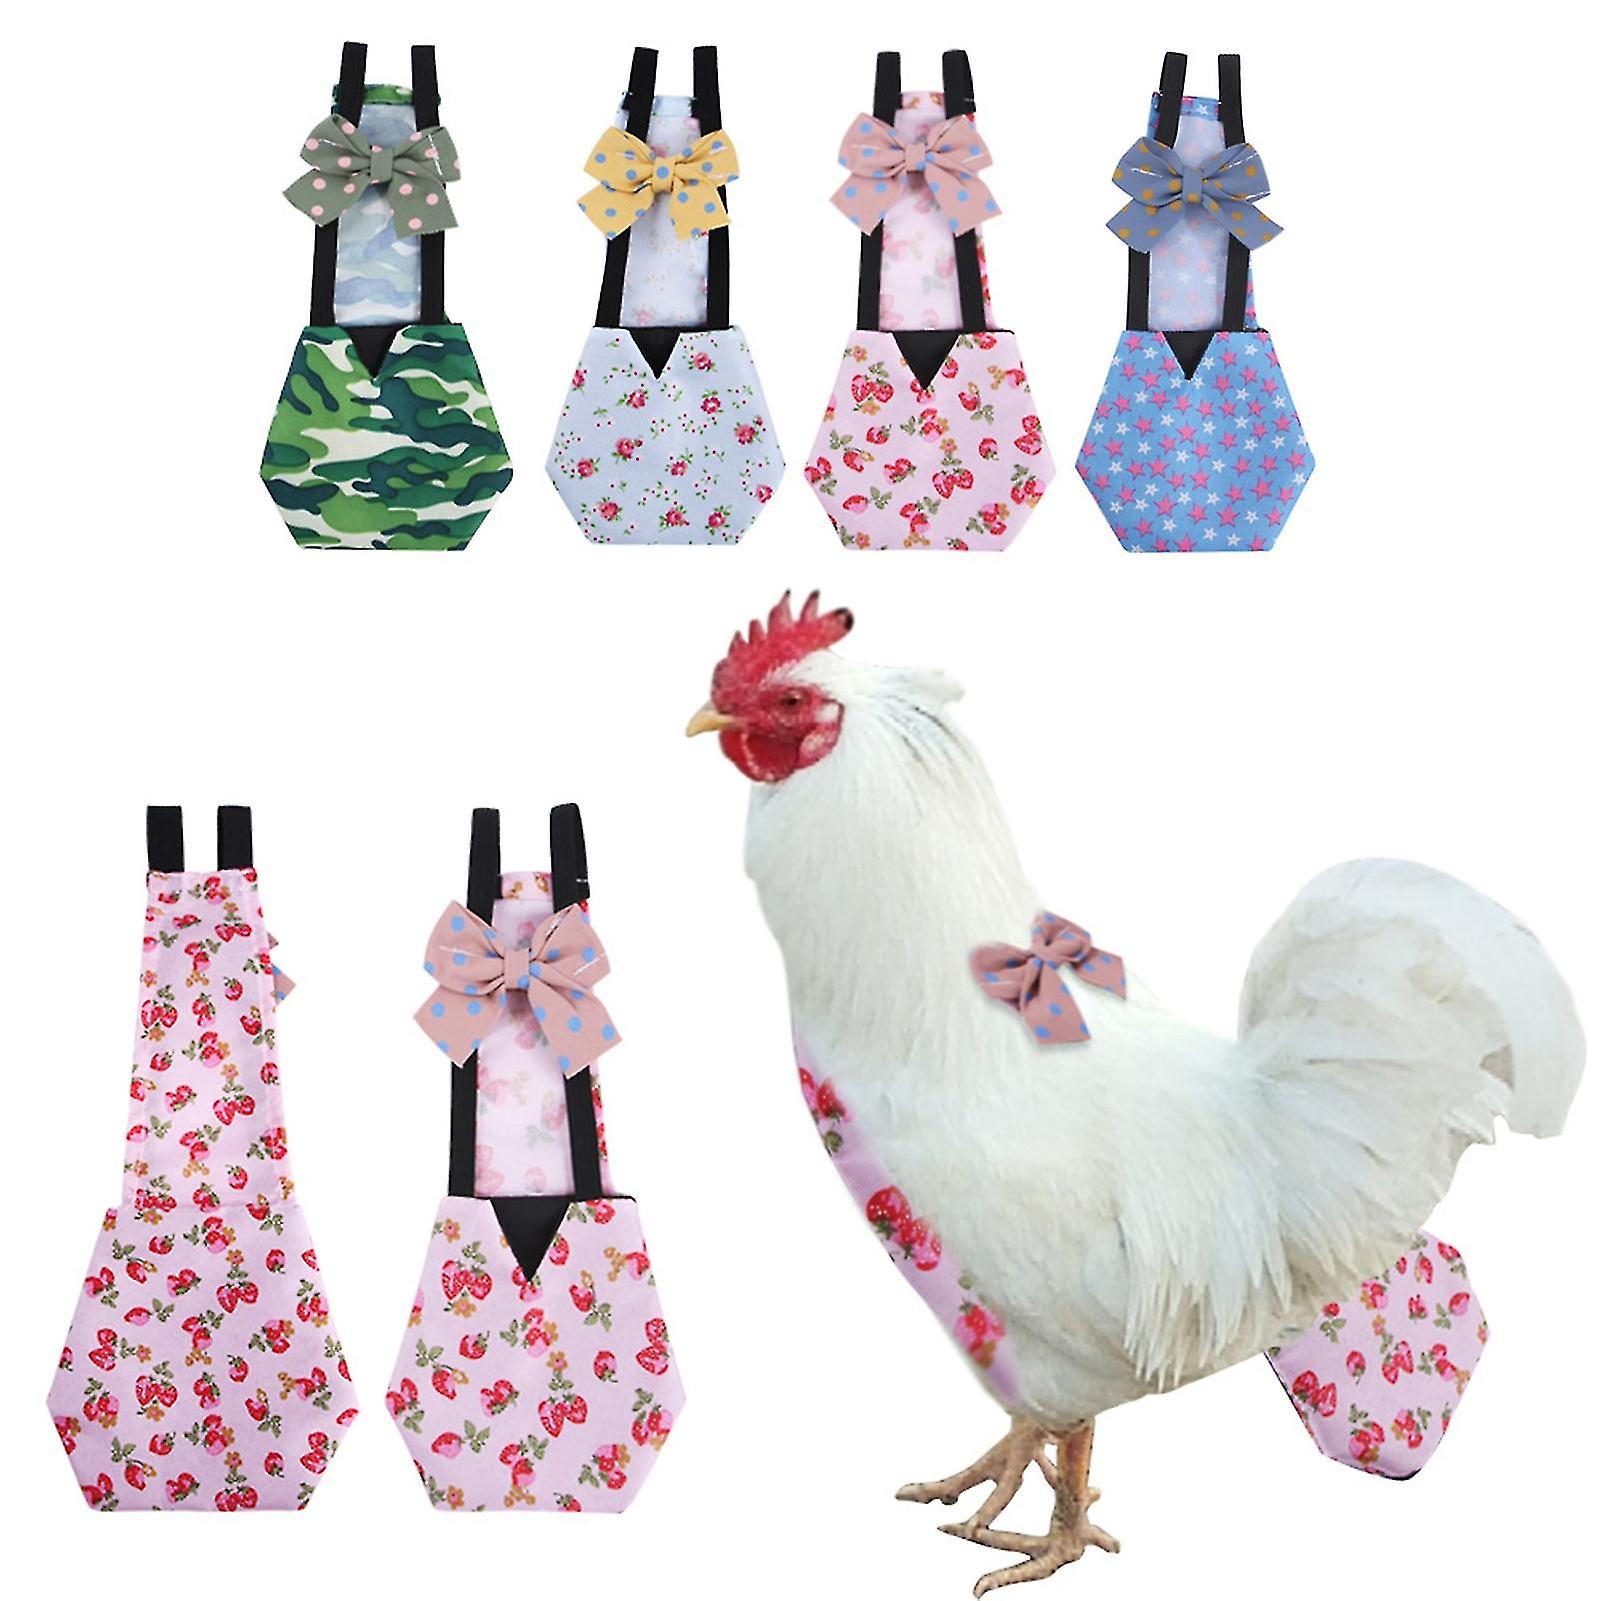 Miman Goose Clothes Printing Waterproof Washable Poultry Chicken Cloth Diapers With Bow Tie For Farm | Fruugo Us